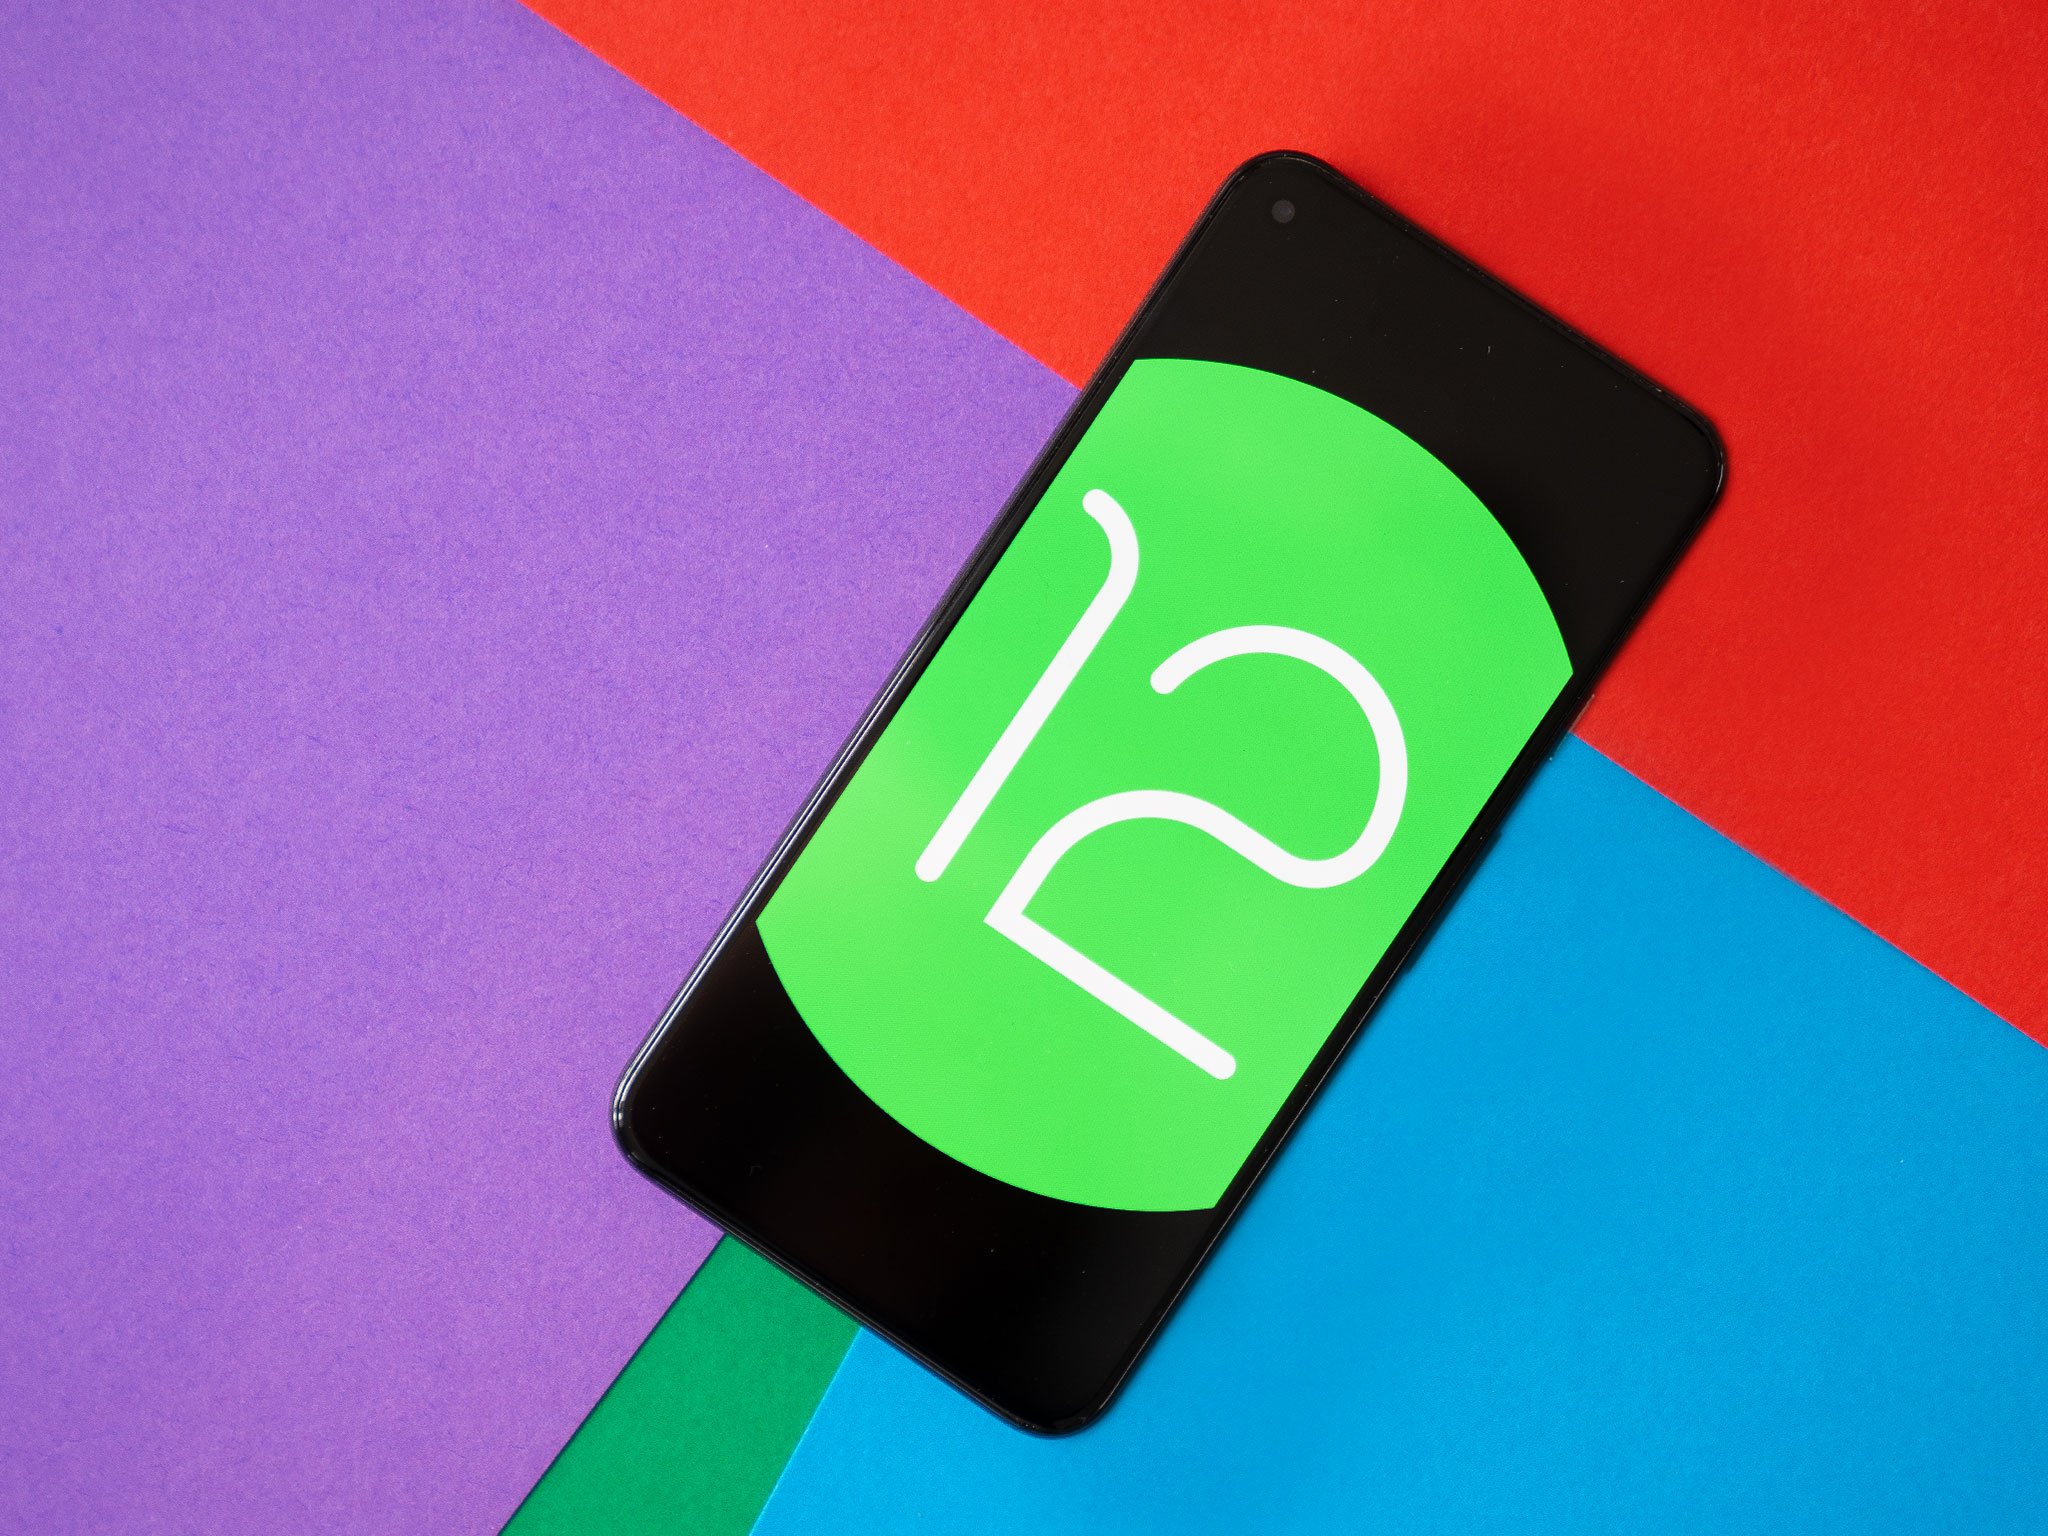 How to install the Android 12 Beta on your phone right now